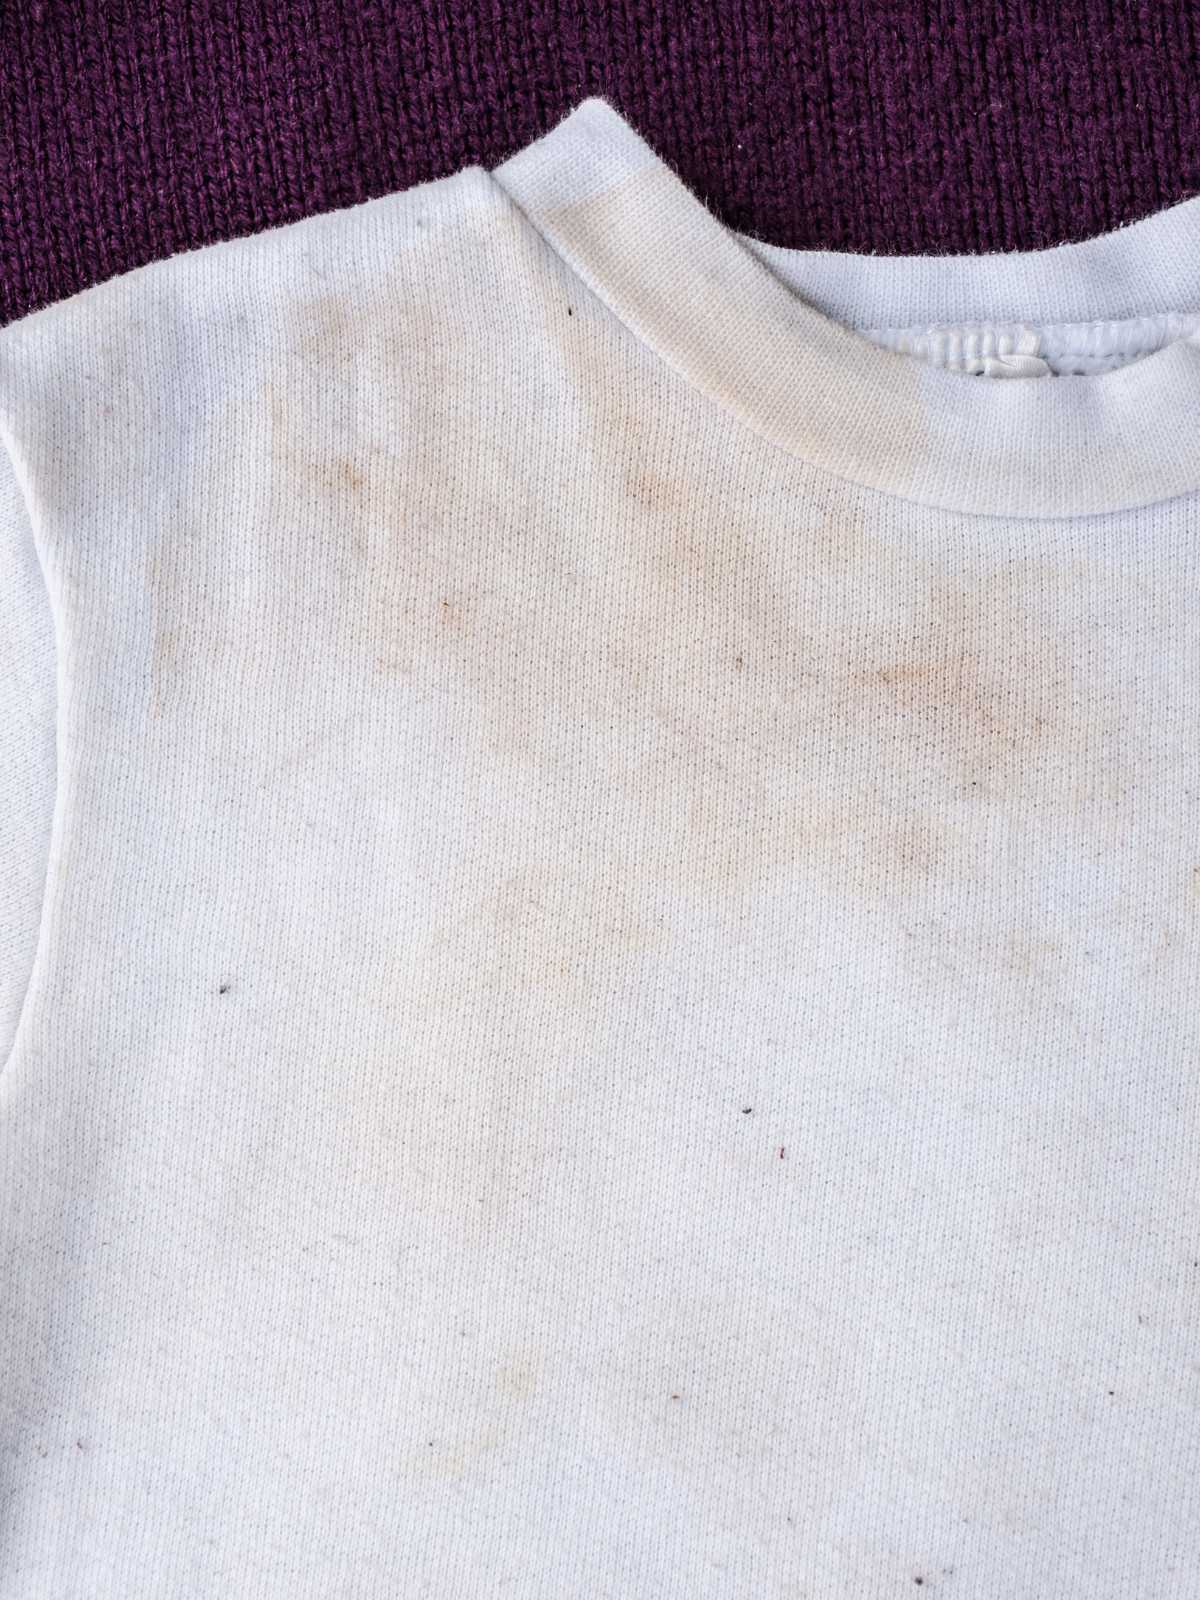 How to Remove Stains from White Clothes